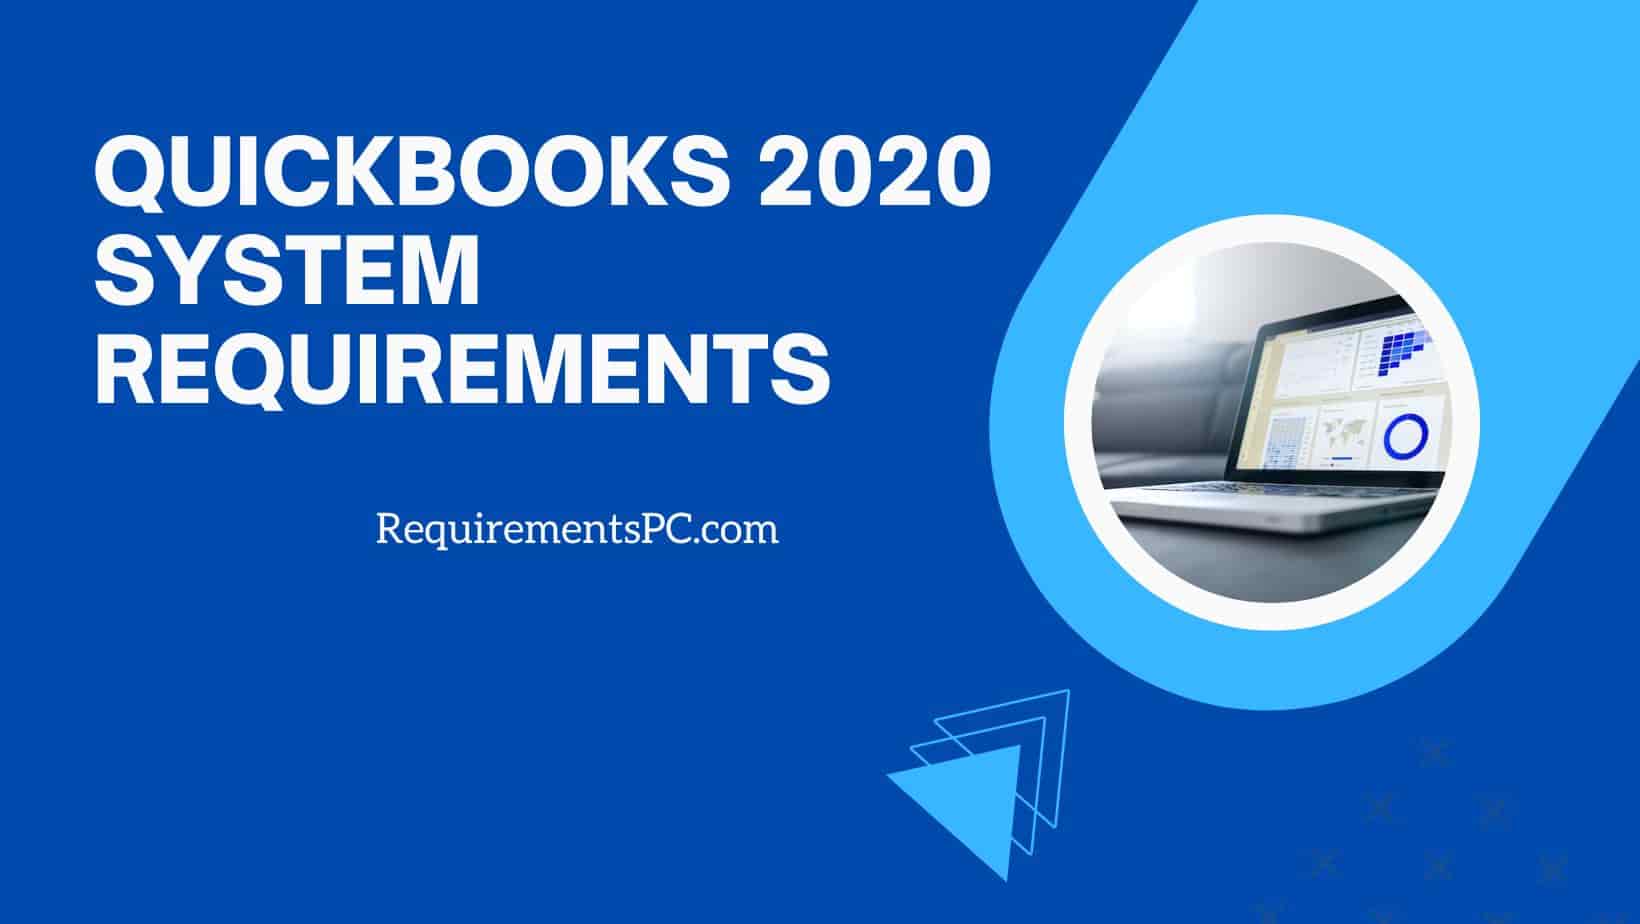 You are currently viewing Quickbooks 2020 System Requirements